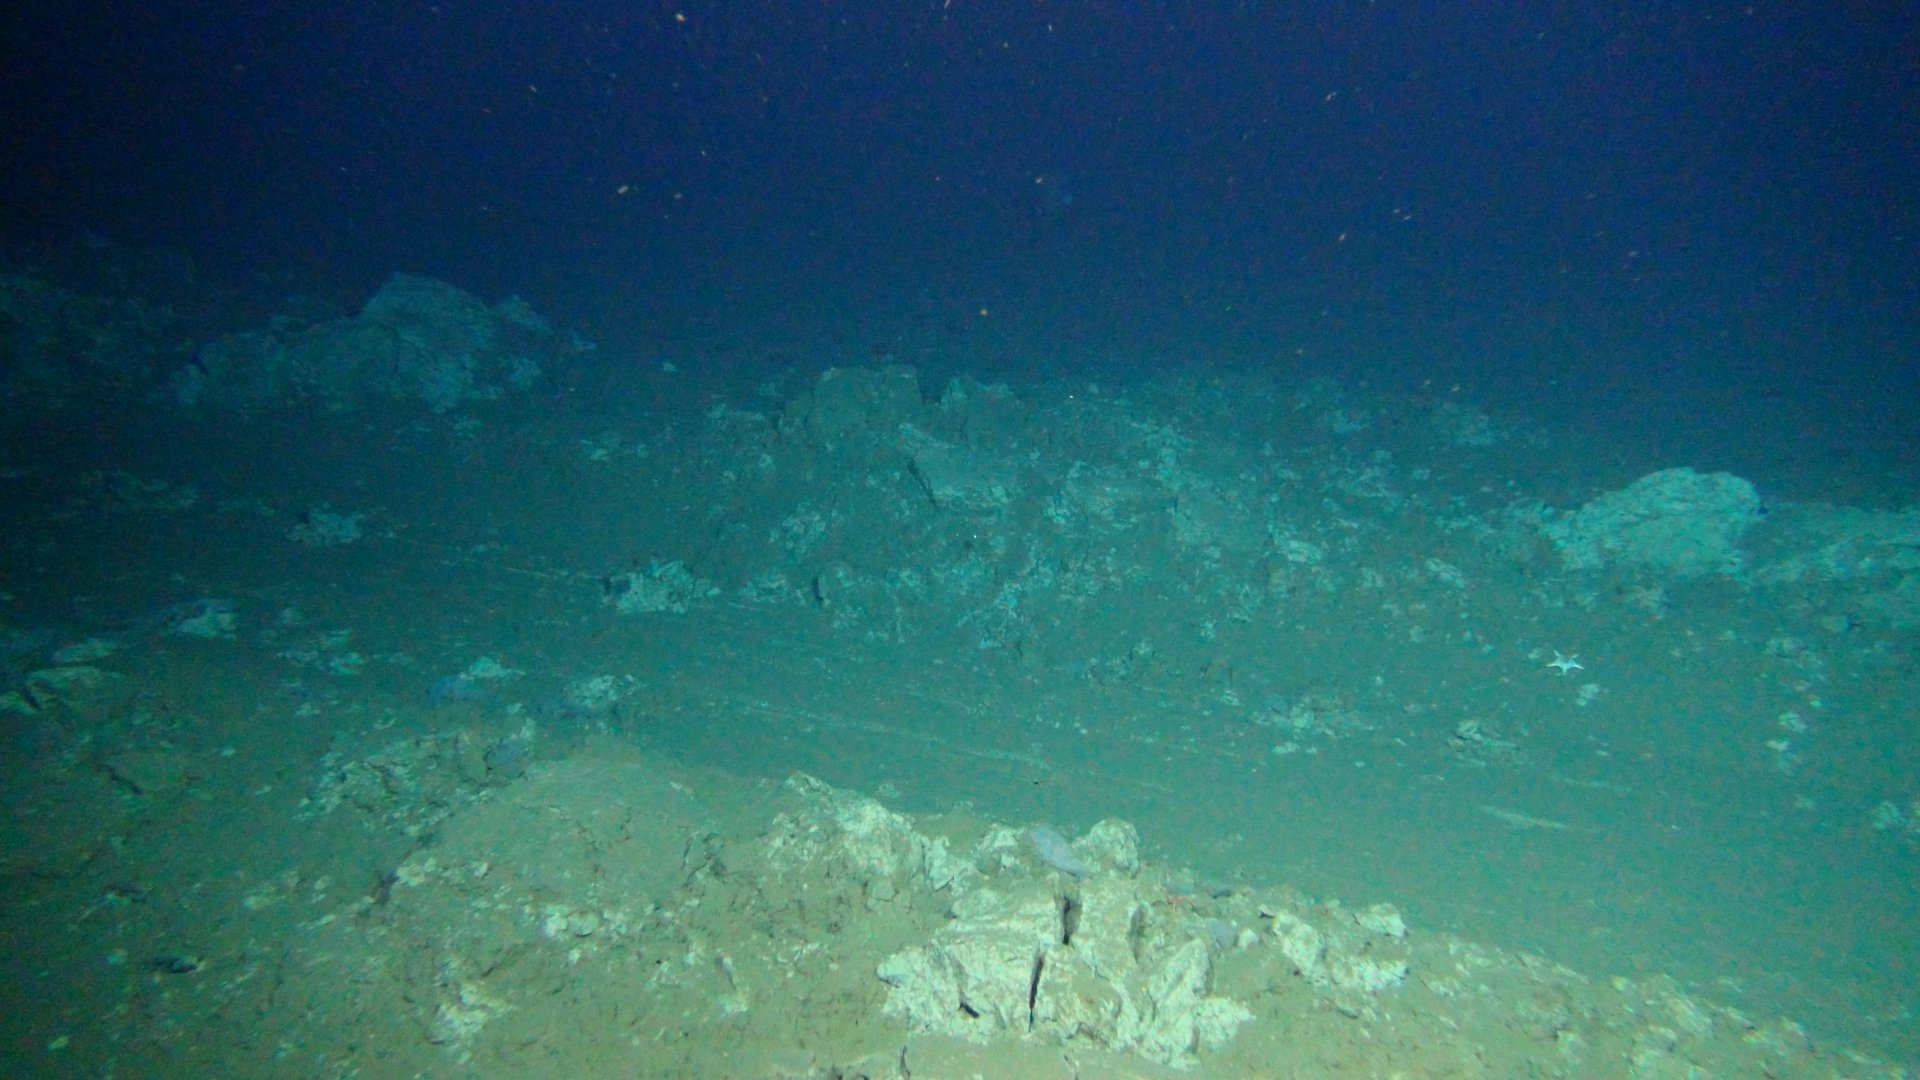 Plough tracks are still clearly visible on the seafloor of the DISCOL area 26 years after the disturbance.  (© ROV-Team/GEOMAR)